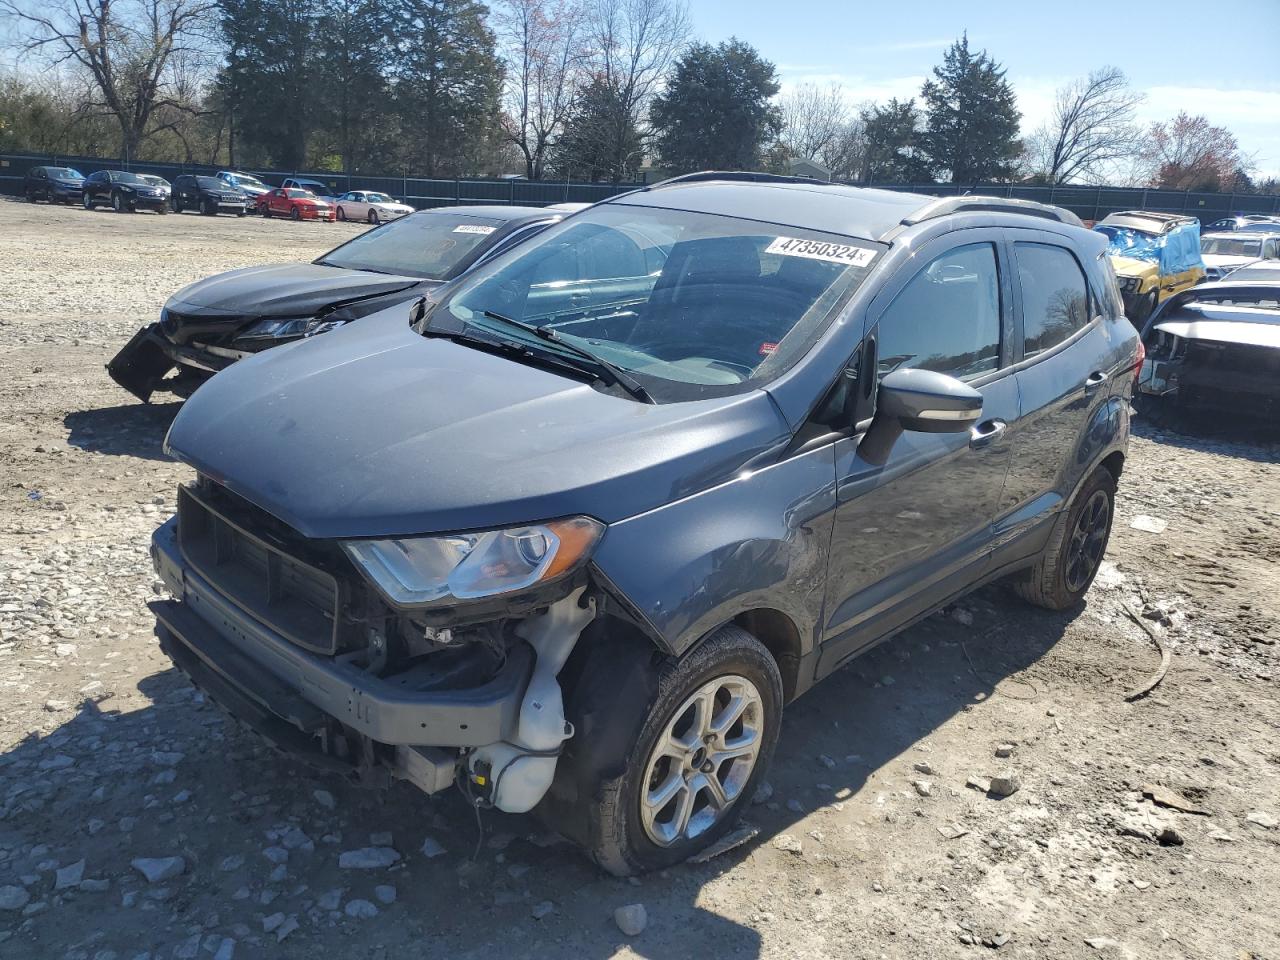 vin: MAJ3P1TE4JC194799 MAJ3P1TE4JC194799 2018 ford ecosport 1000 for Sale in 37354 6763, Tn - Knoxville, Madisonville, Tennessee, USA